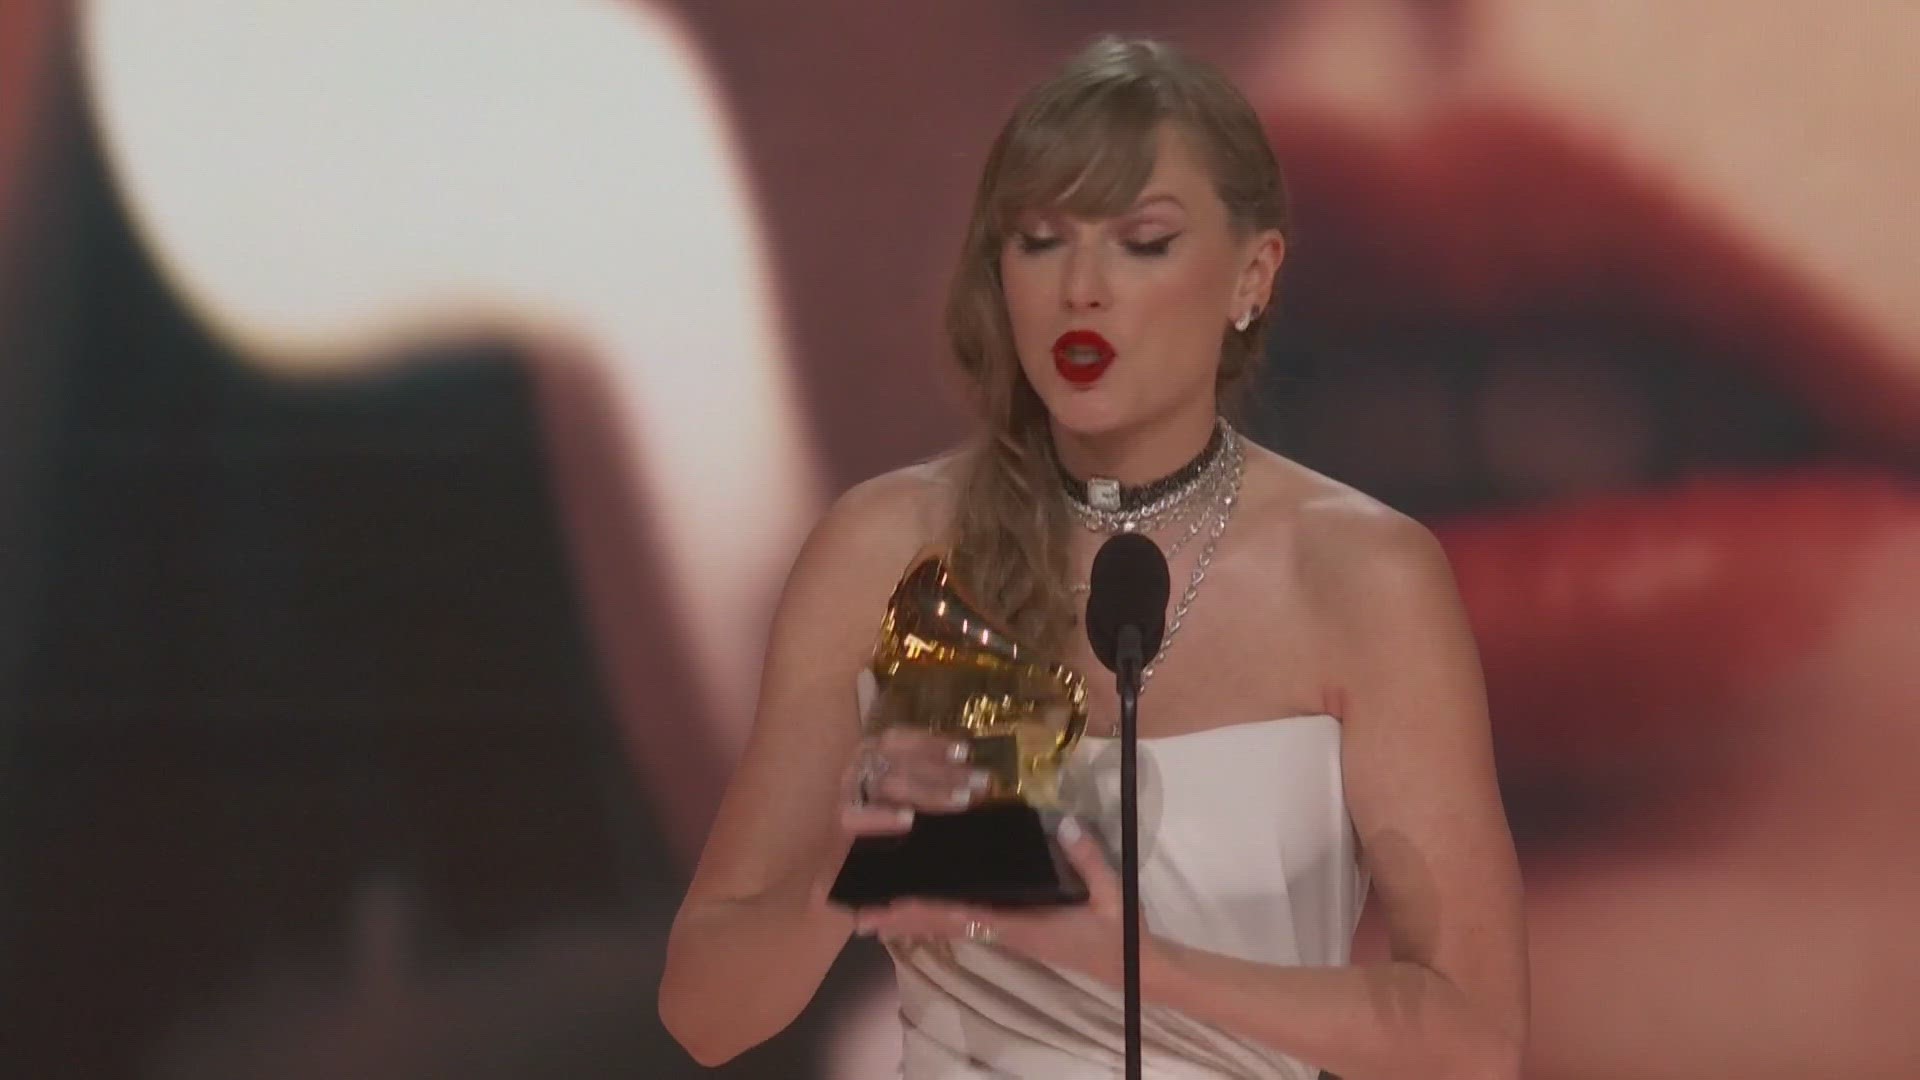 While accepting the 13th Grammy of her career, Swift made the announcement.